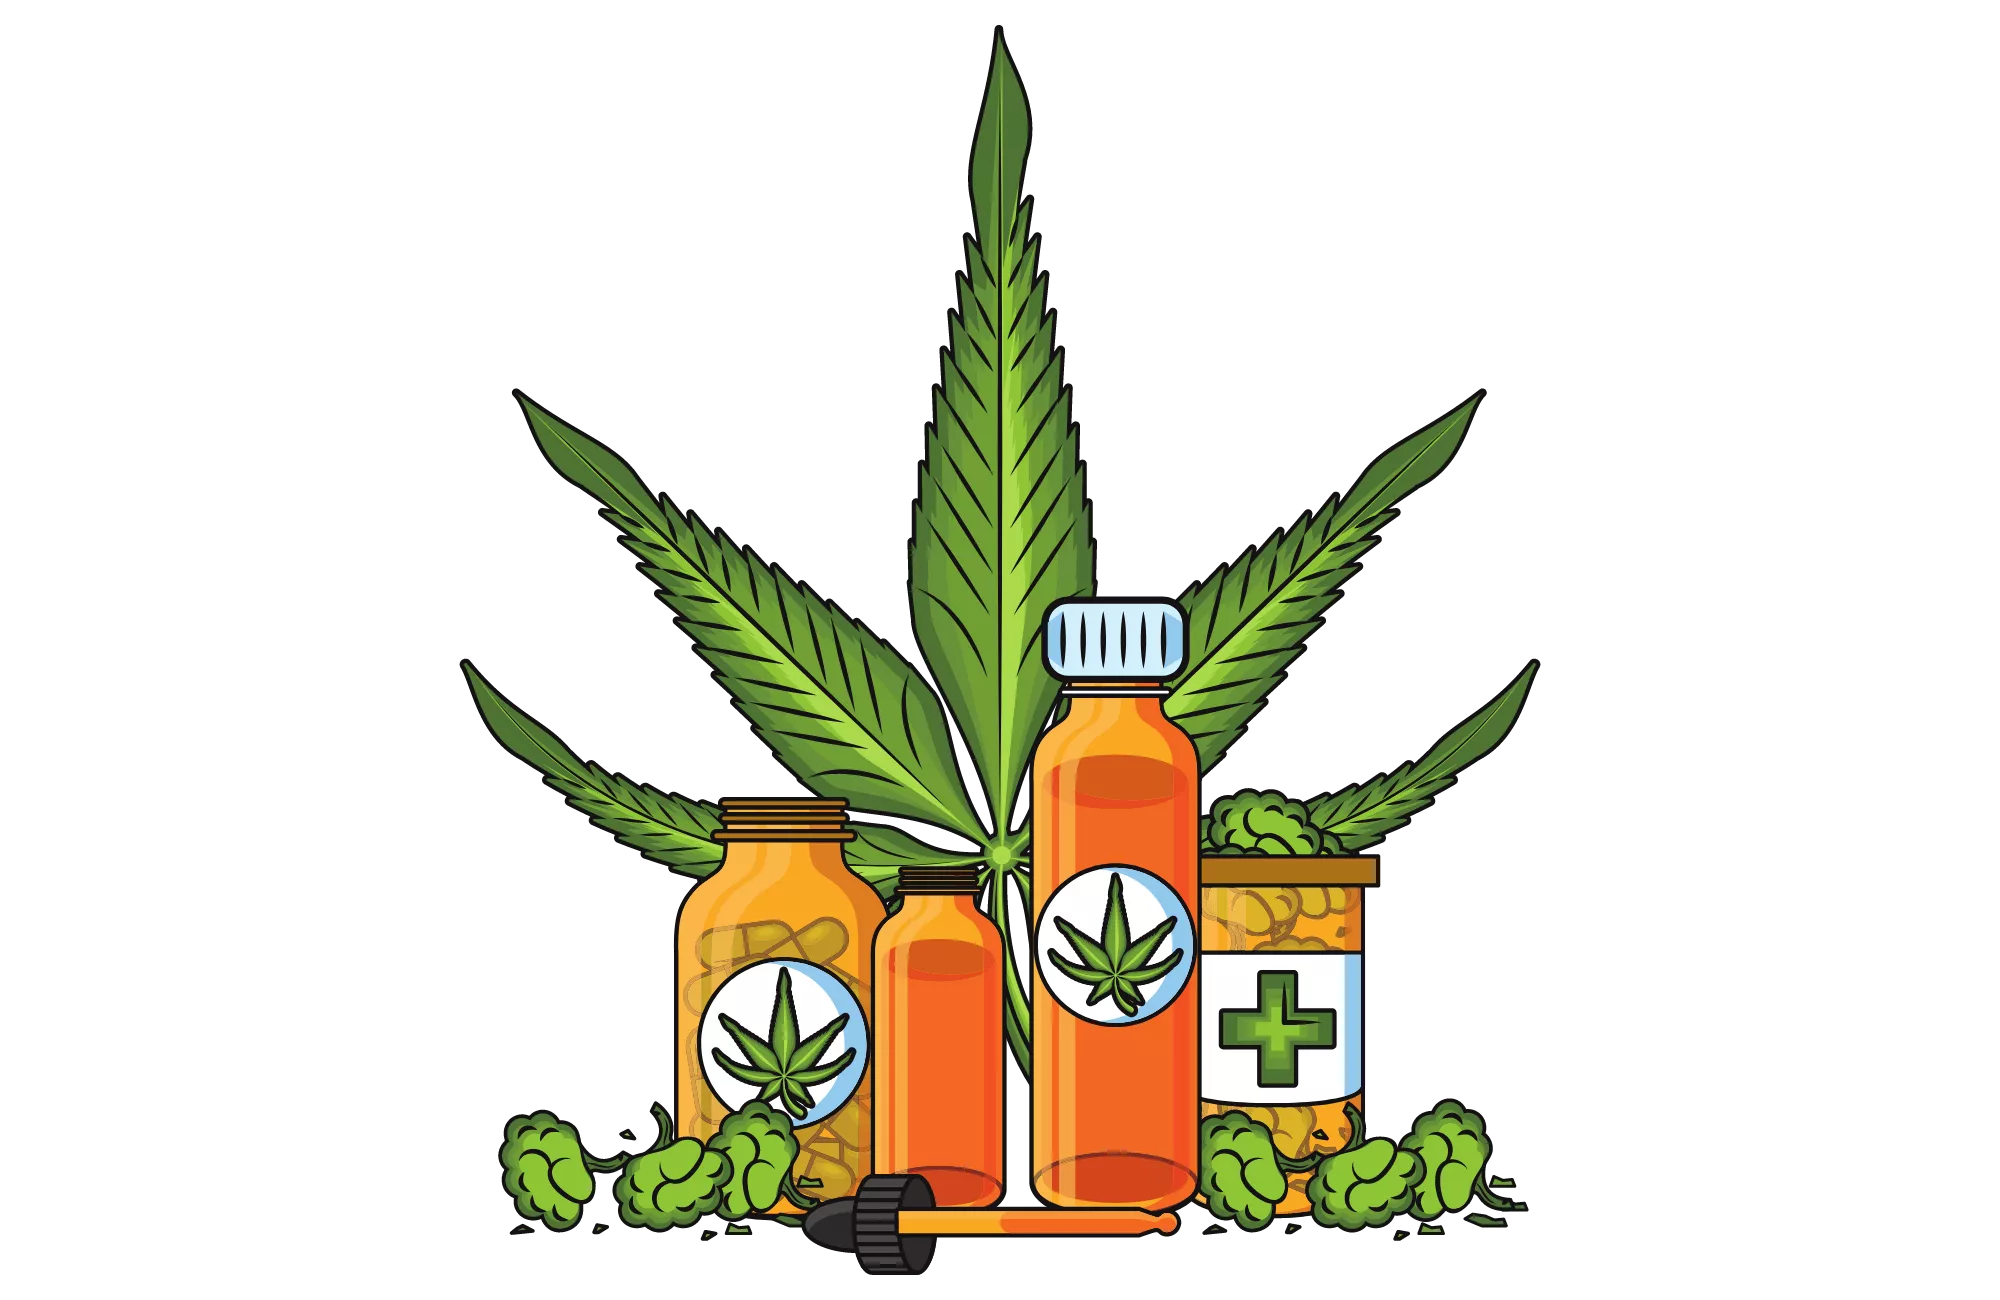 a group of CBD products selling in Texas including CBD capsules, CBD oil, and other hemp-derived products